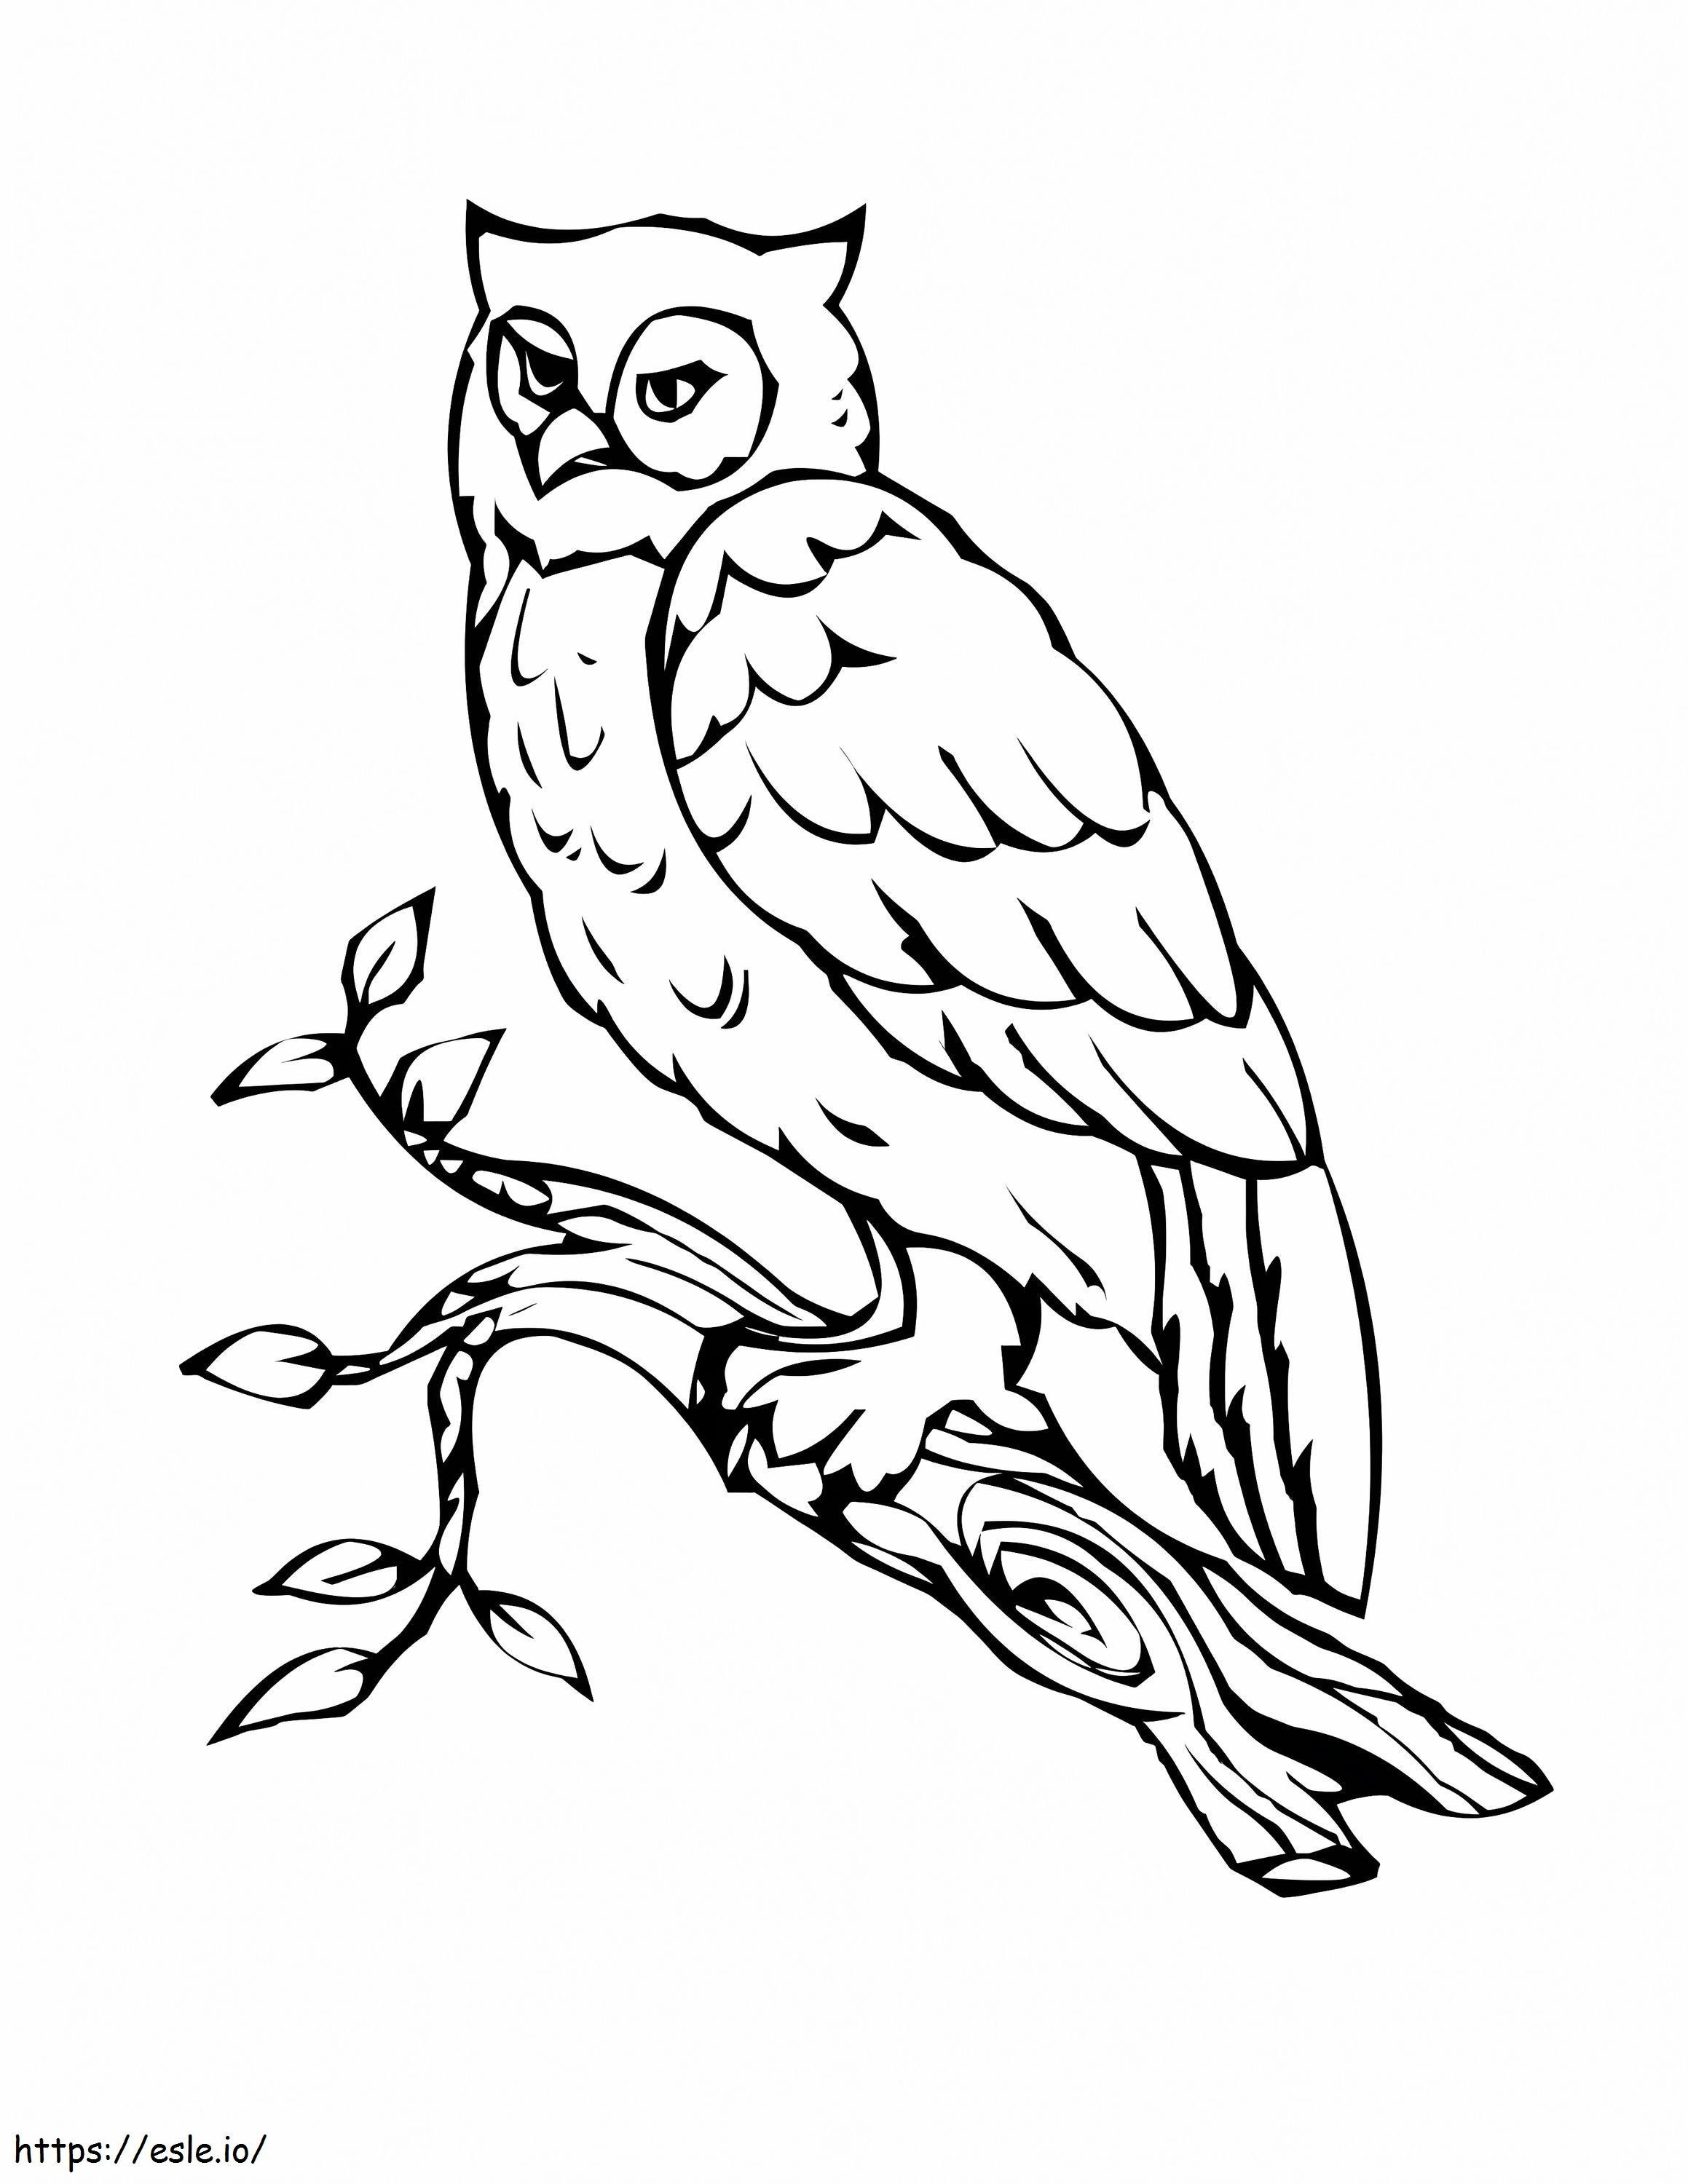 Owl 4 coloring page